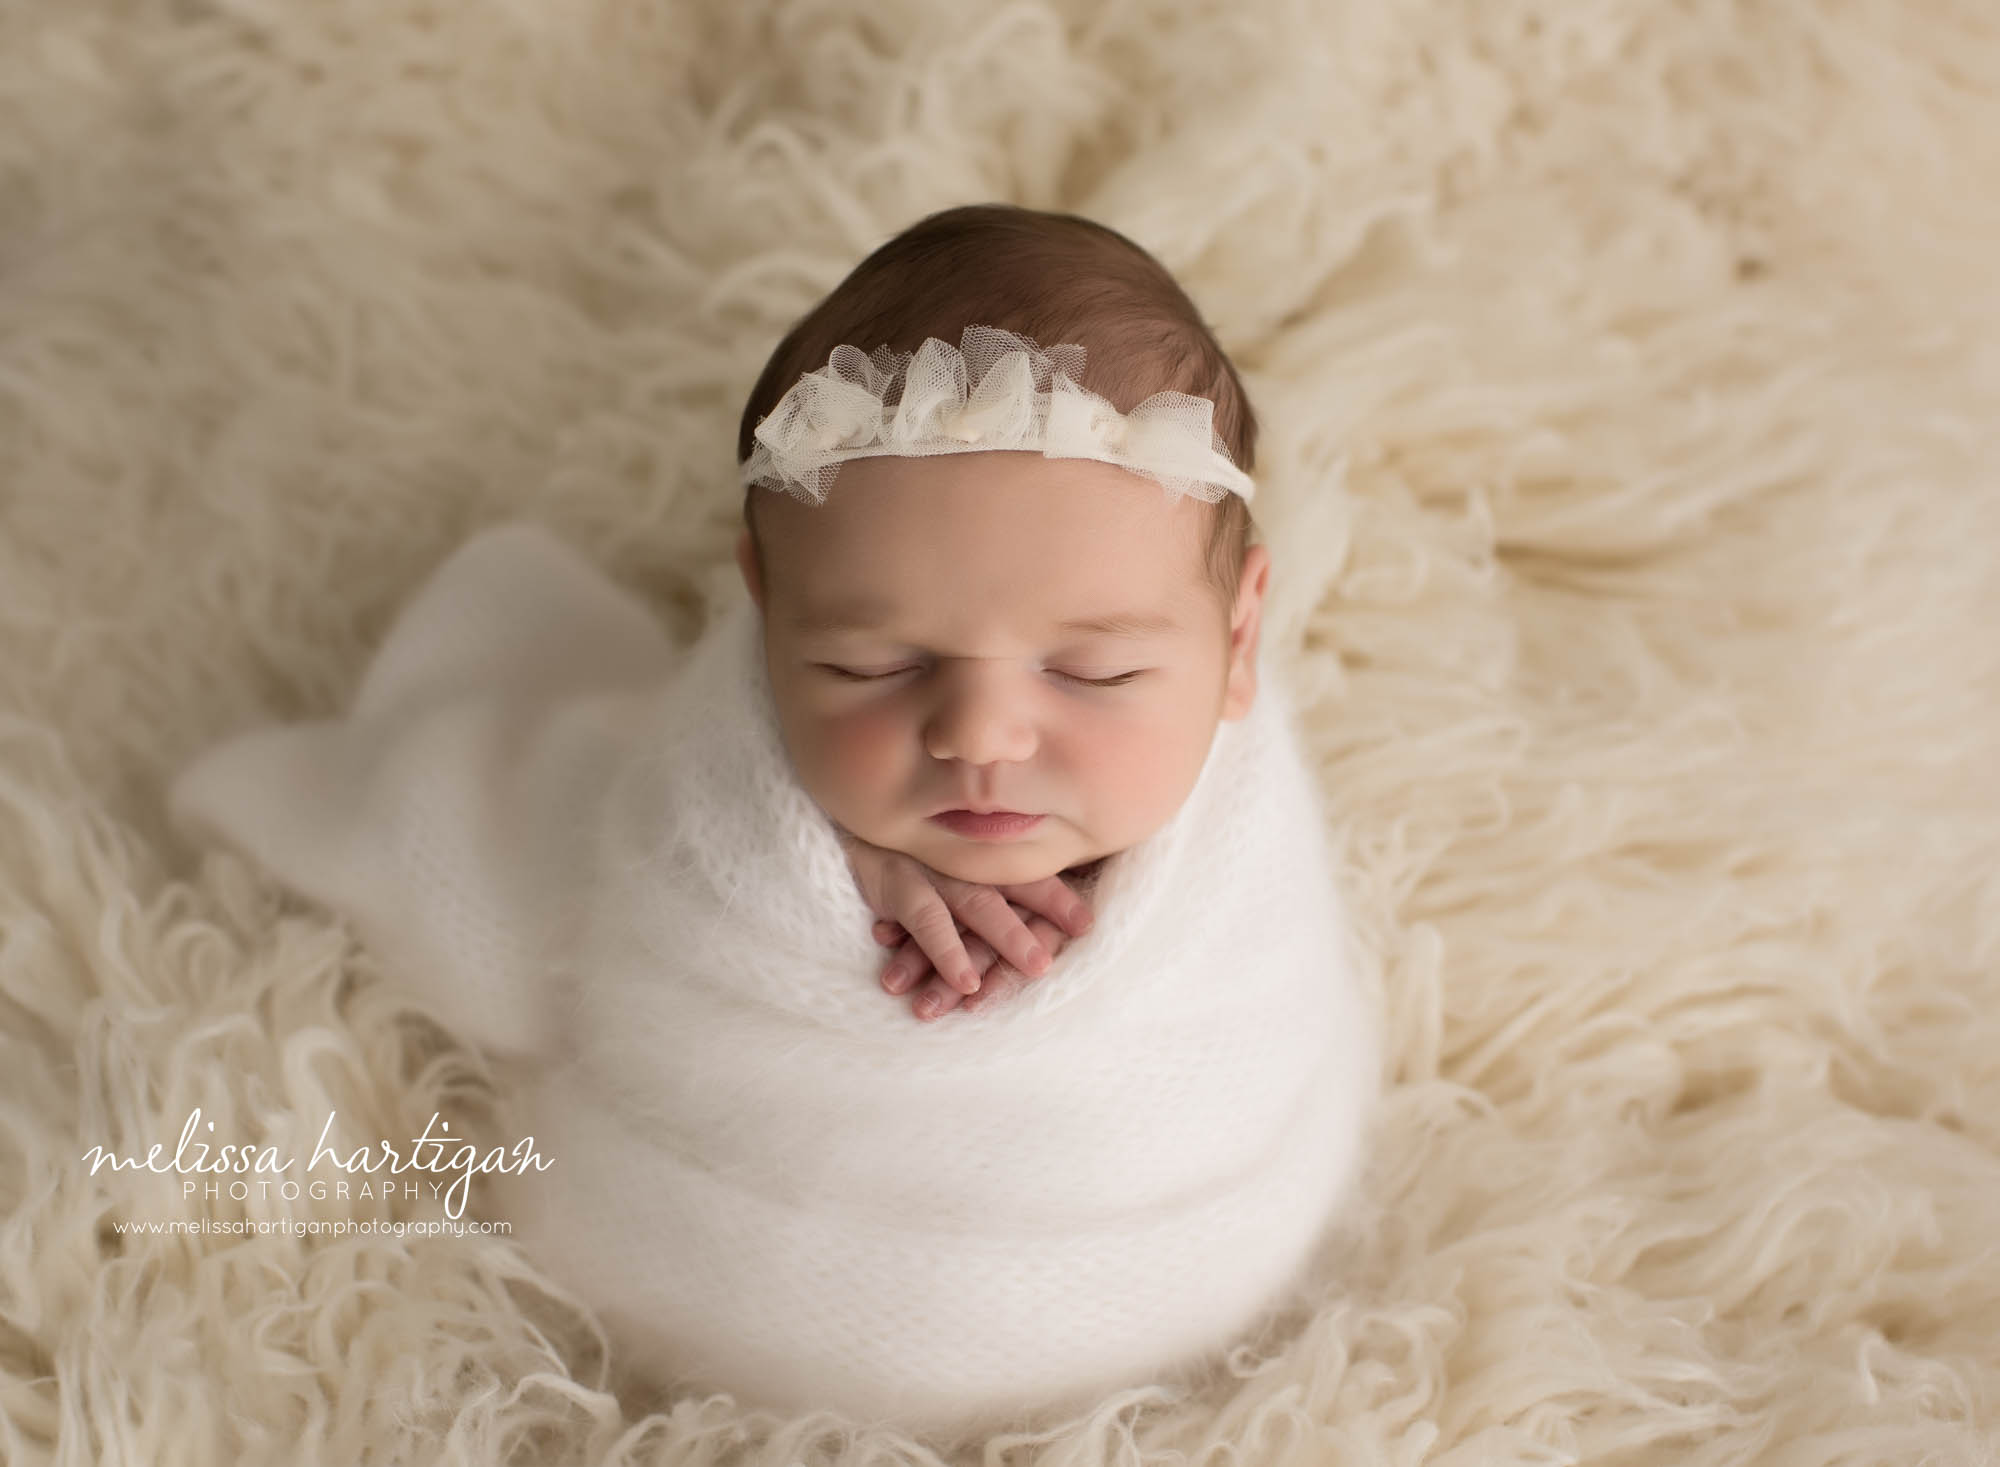 newborn baby girl wrapped in white and cream knitted wrap with bow headband